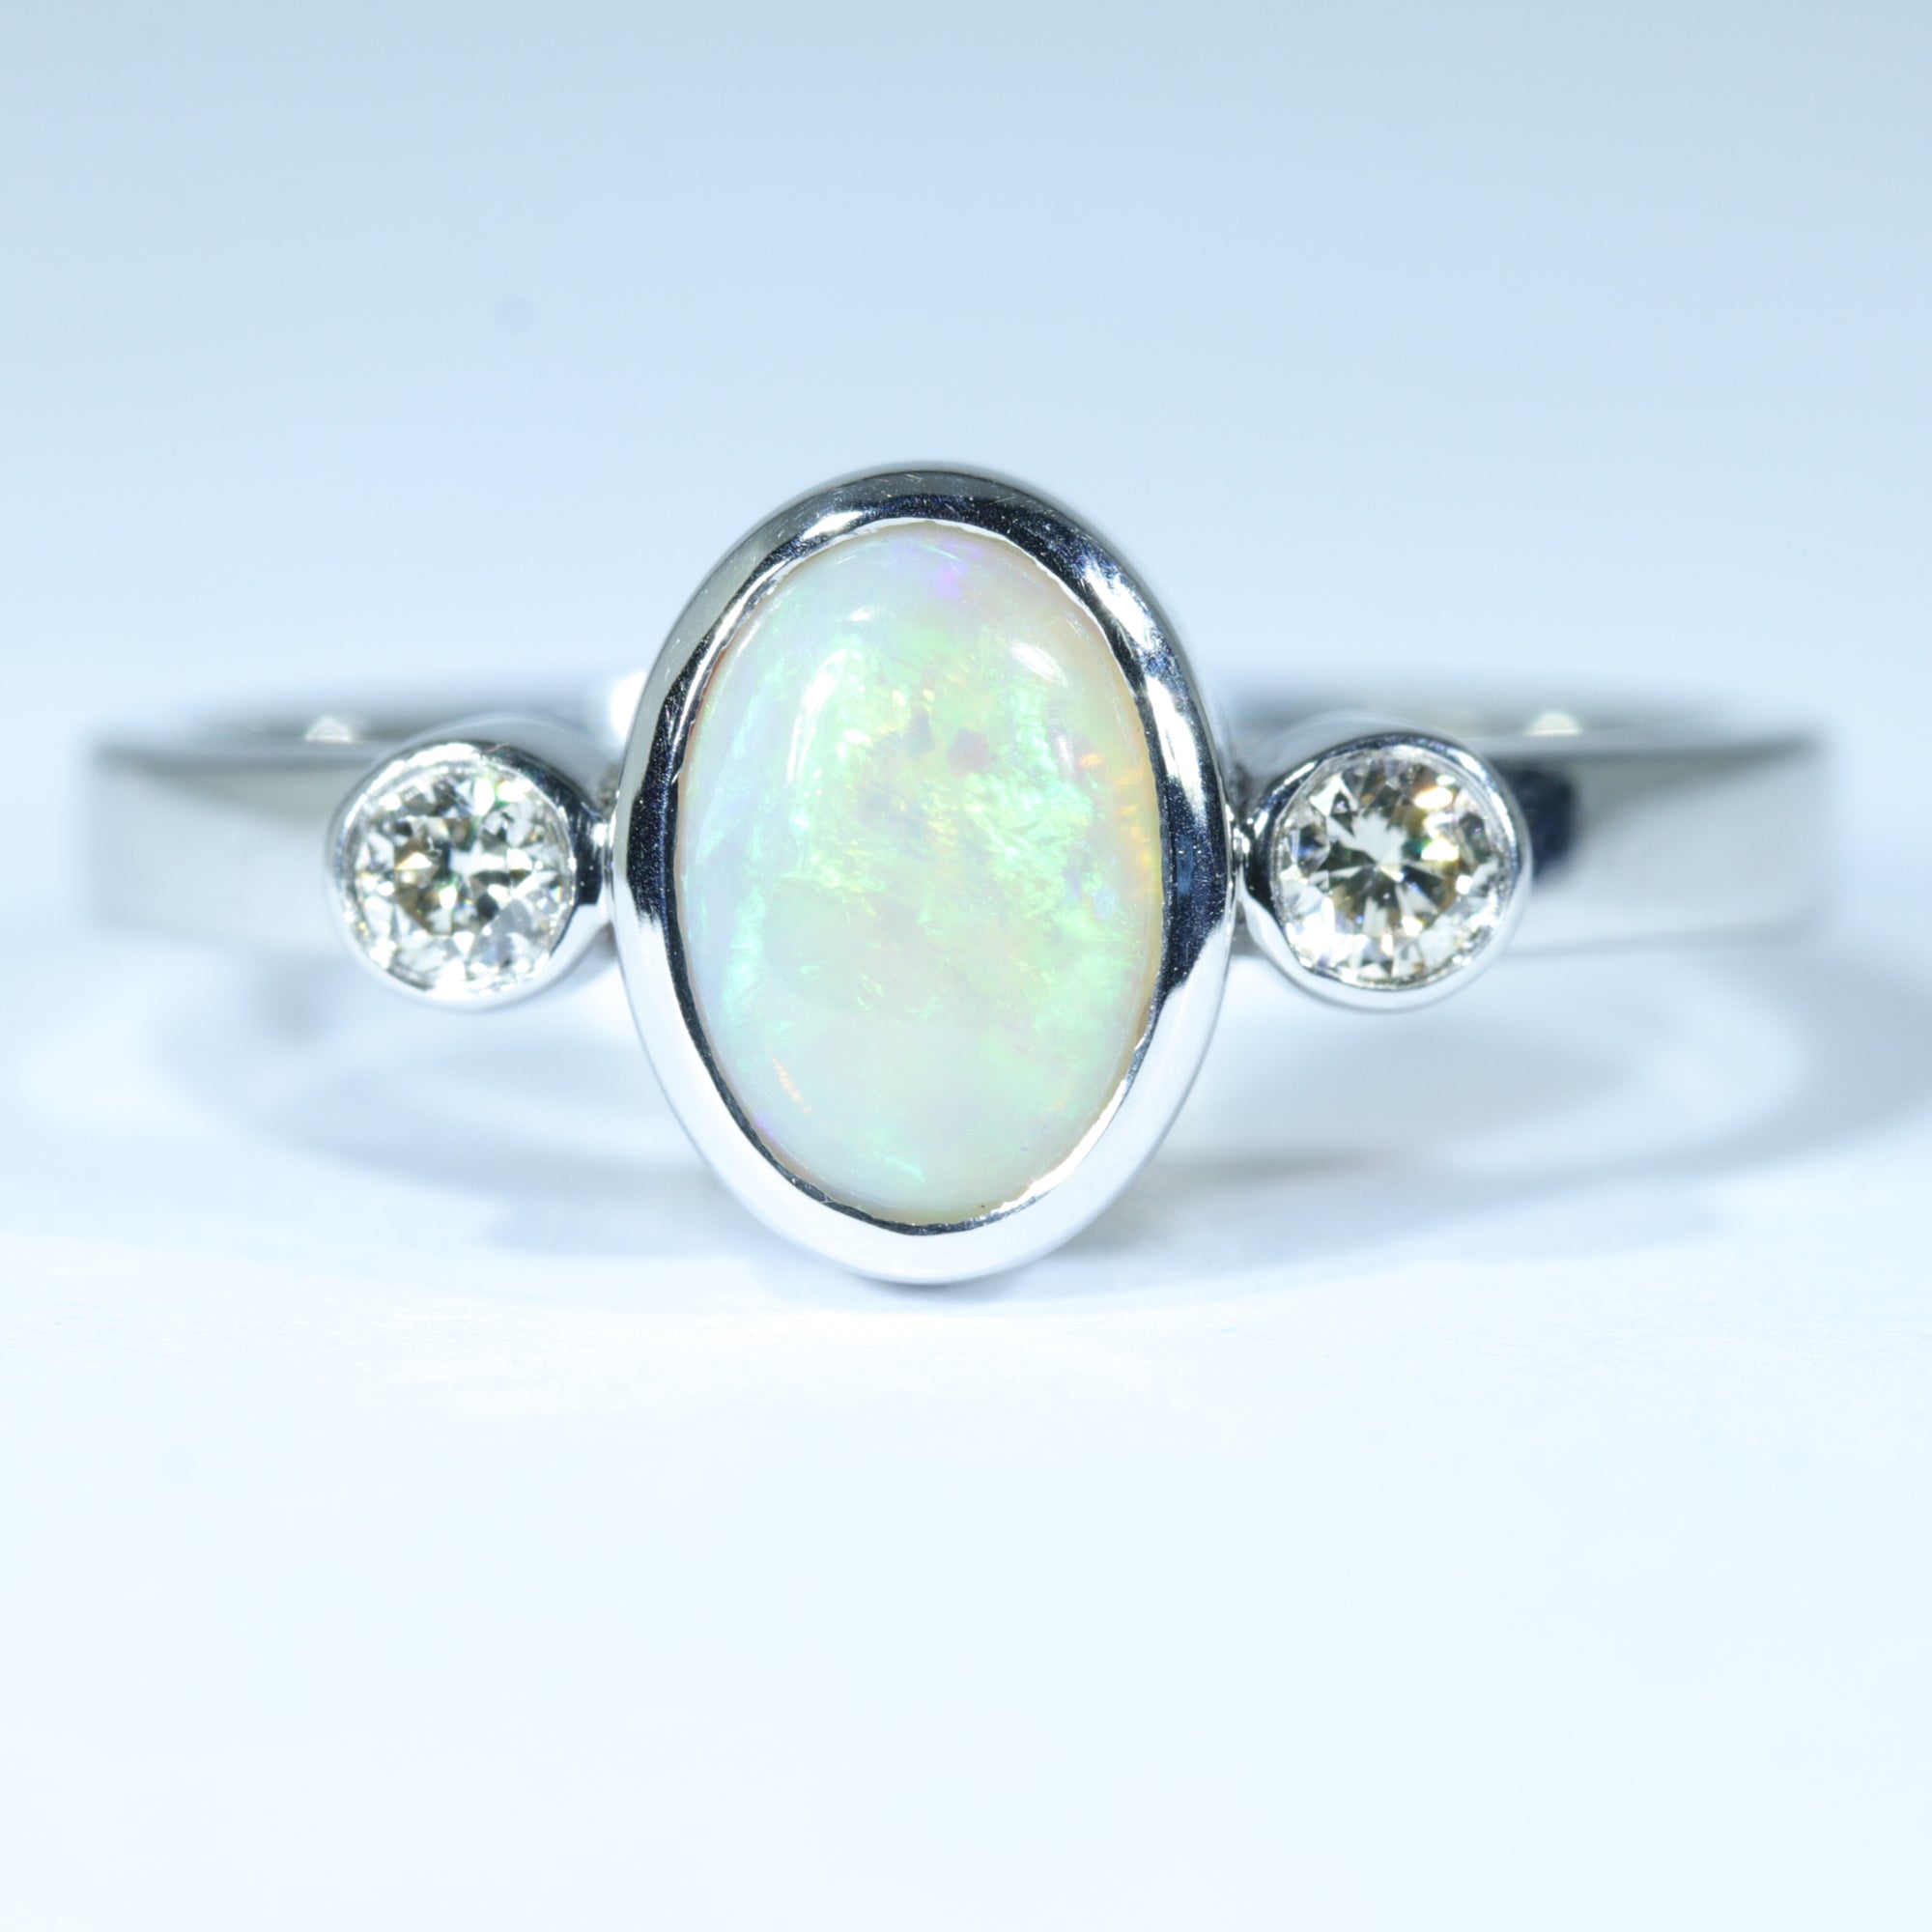 Natural Opal Engagement and Wedding Ring Set - 14k White Gold